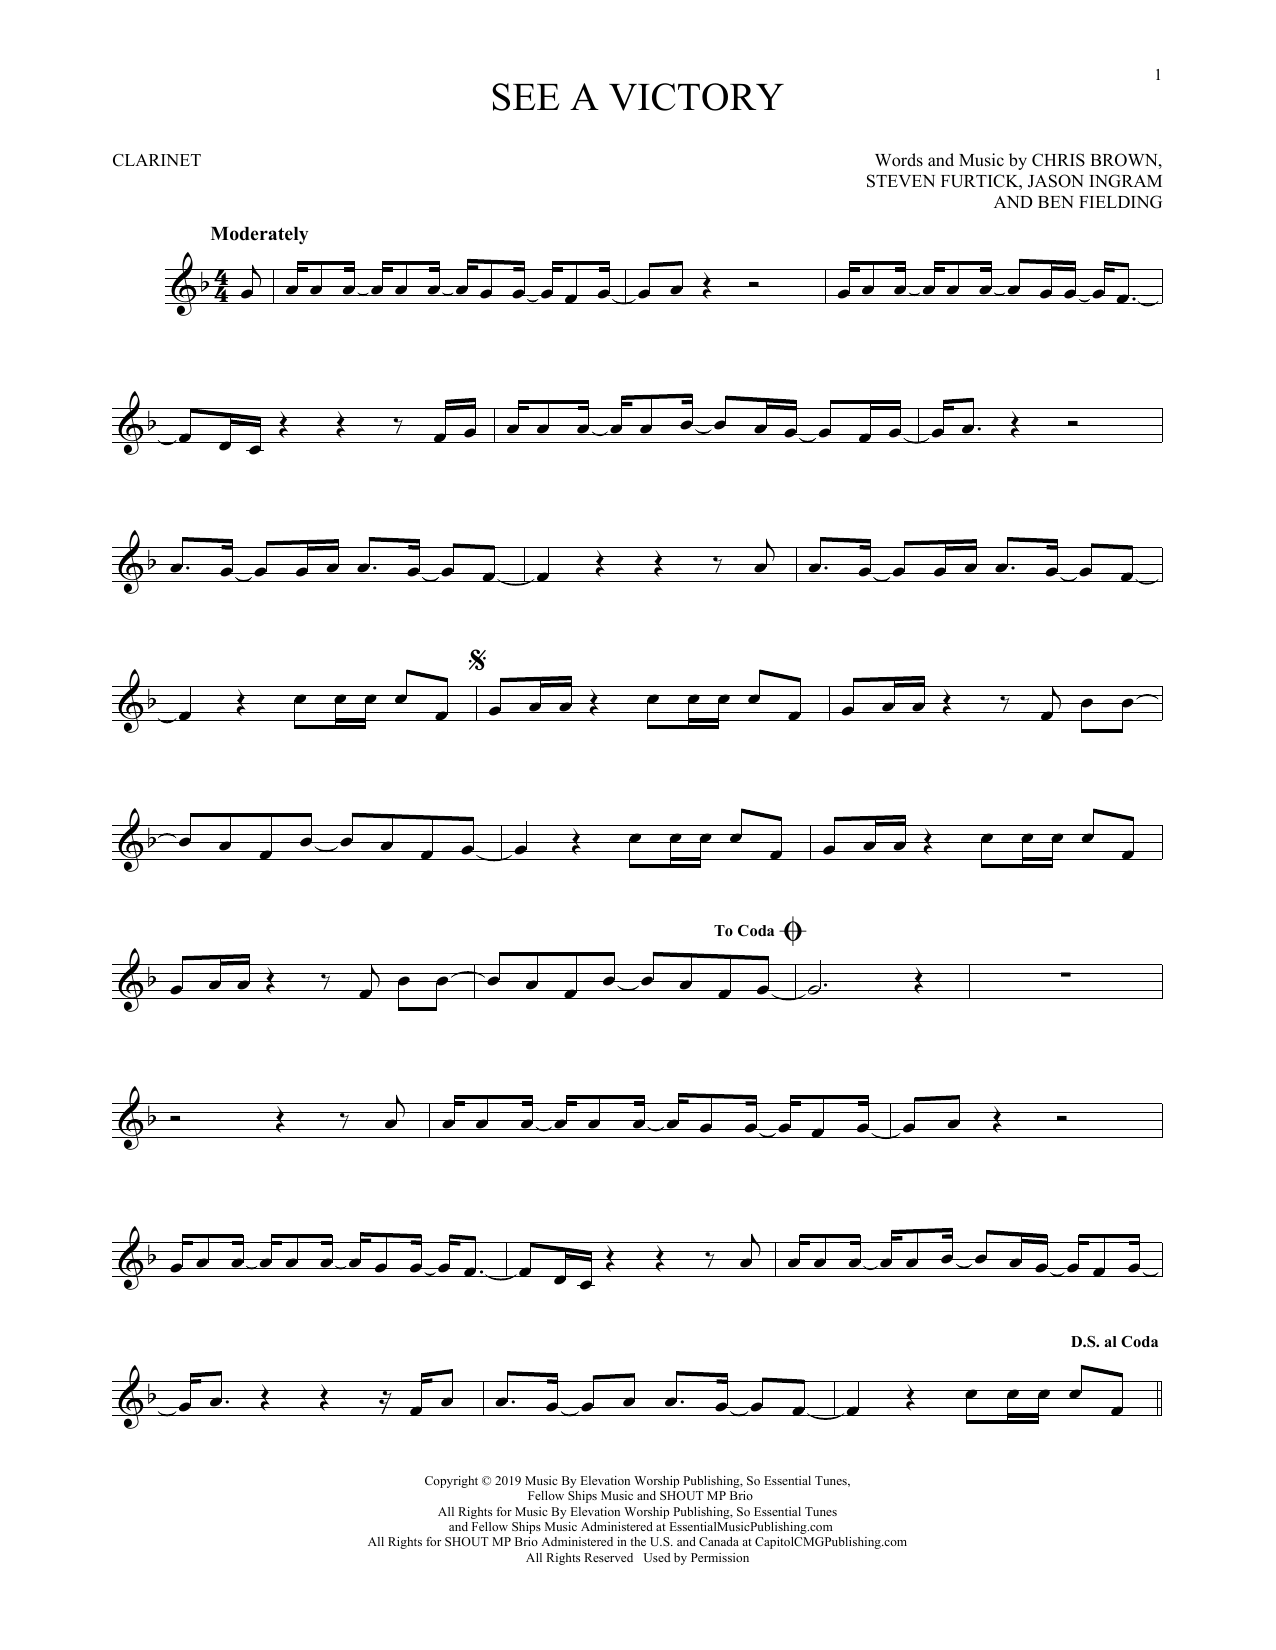 Elevation Worship See A Victory sheet music notes printable PDF score